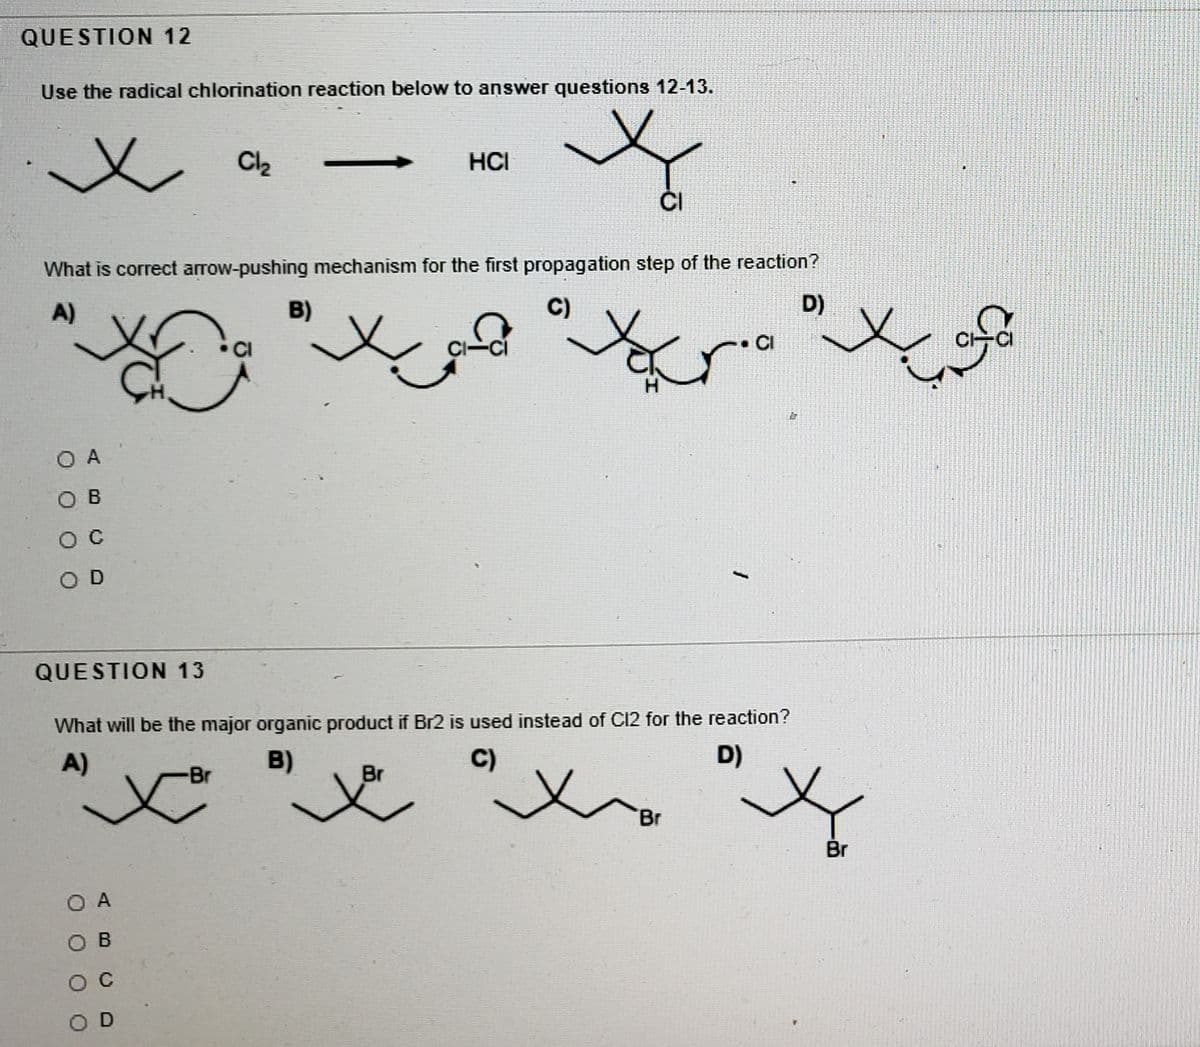 QUESTION 12
Use the radical chlorination reaction below to answer questions 12-13.
Cl2
HCI
ČI
What is correct arrow-pushing mechanism for the first propagation step of the reaction?
A)
B)
C)
D)
CI
CI
O A
O B
O D
QUESTION 13
What will be the major organic product if Br2 is used instead of C12 for the reaction?
A)
B)
C)
D)
Br
Br
Br
Br
O A
O B
O C
O D
